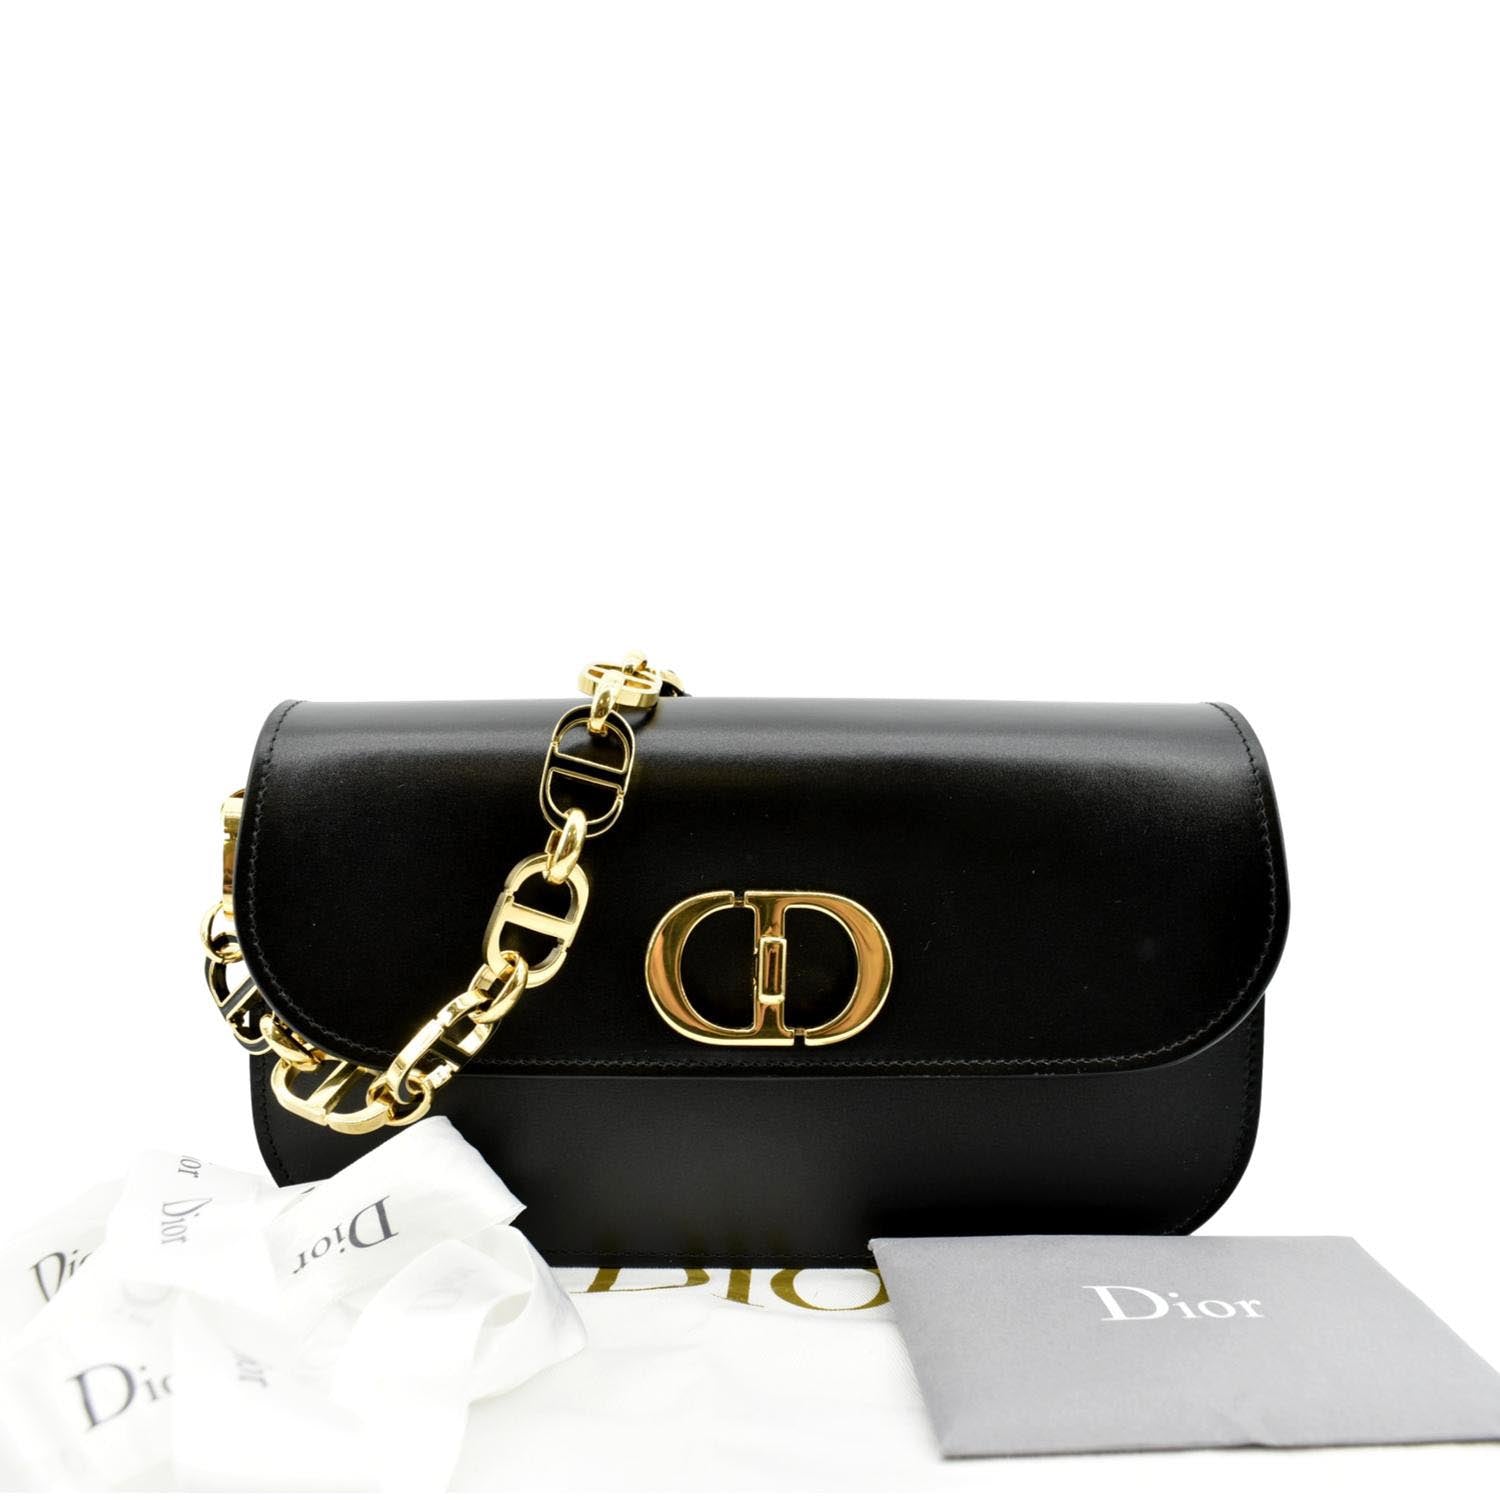 Dior Women's Wallets for sale